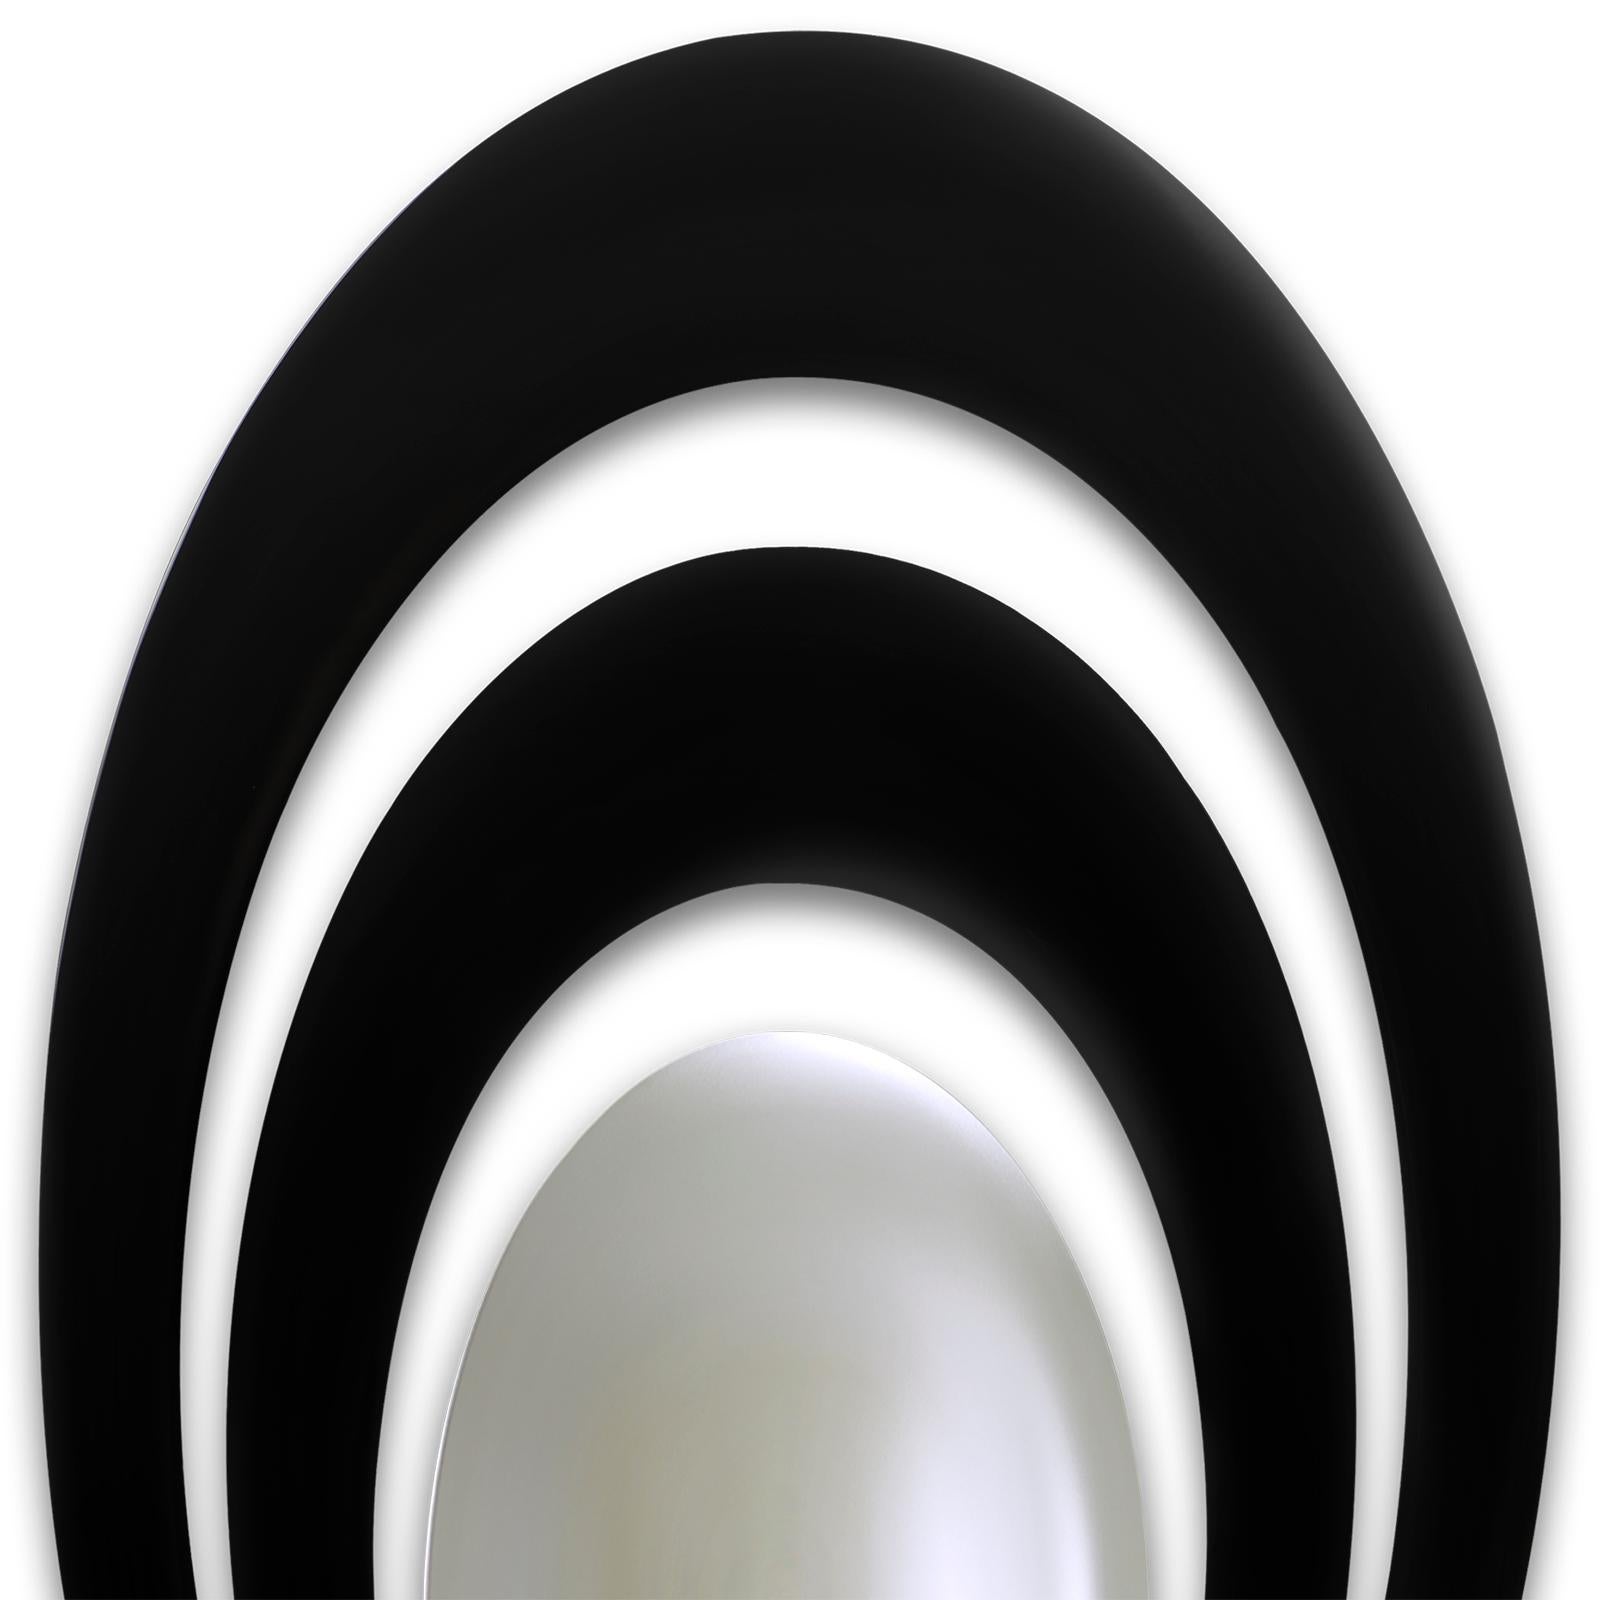 Mirror Serail oval with 2 round frames in
solid hand carved wood in black lacquered
finish. With central round convex mirror.
Also available in retro green finish.